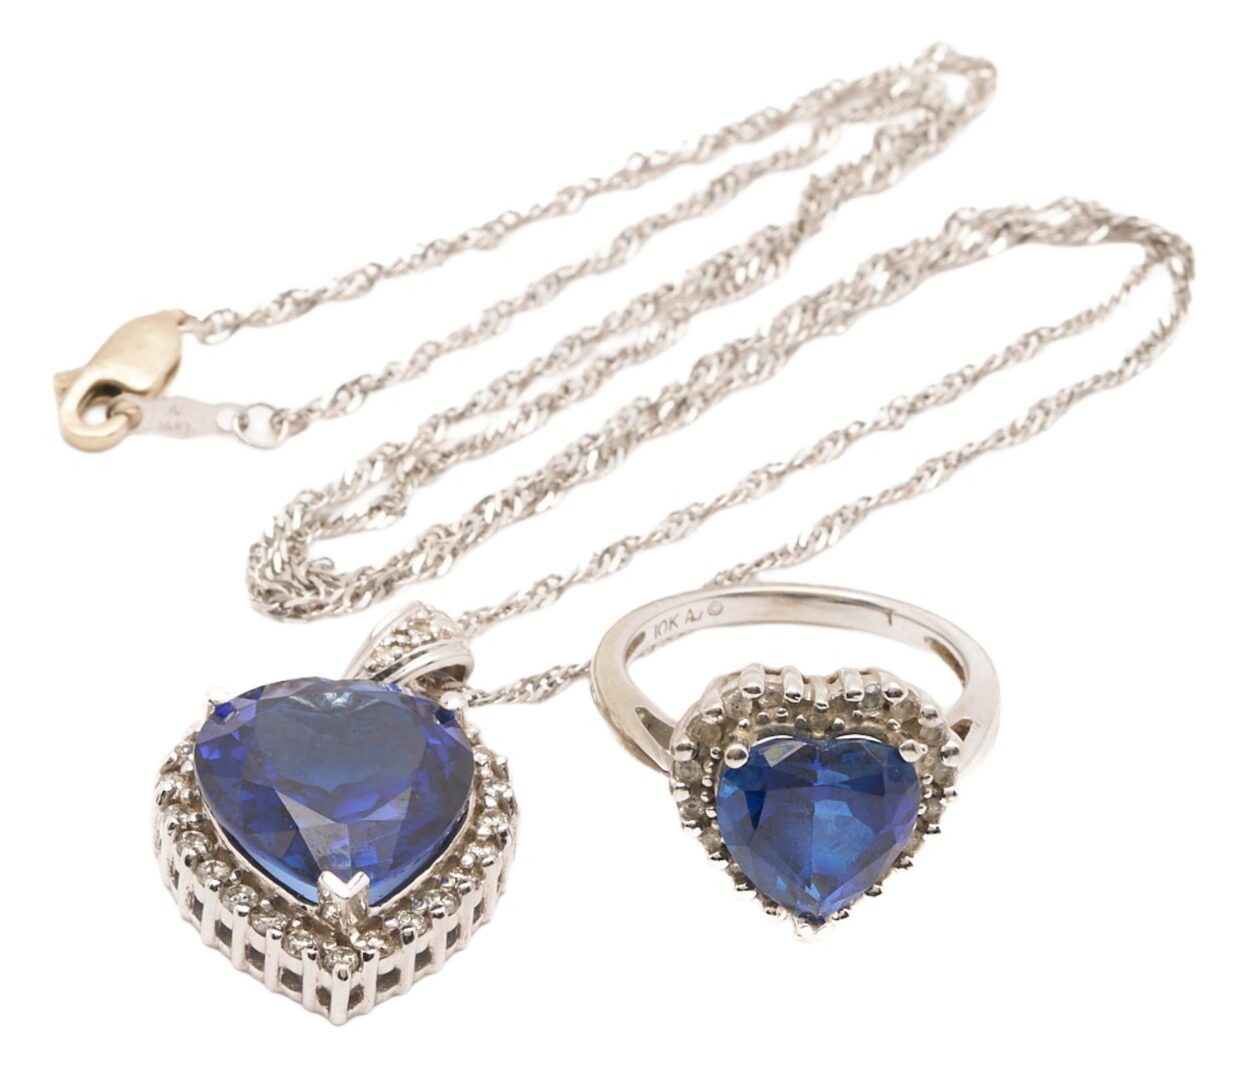 Lot 971: Ladies 14K Gold Heart Shaped Sapphire Necklace & 10K Gold Sapphire Ring